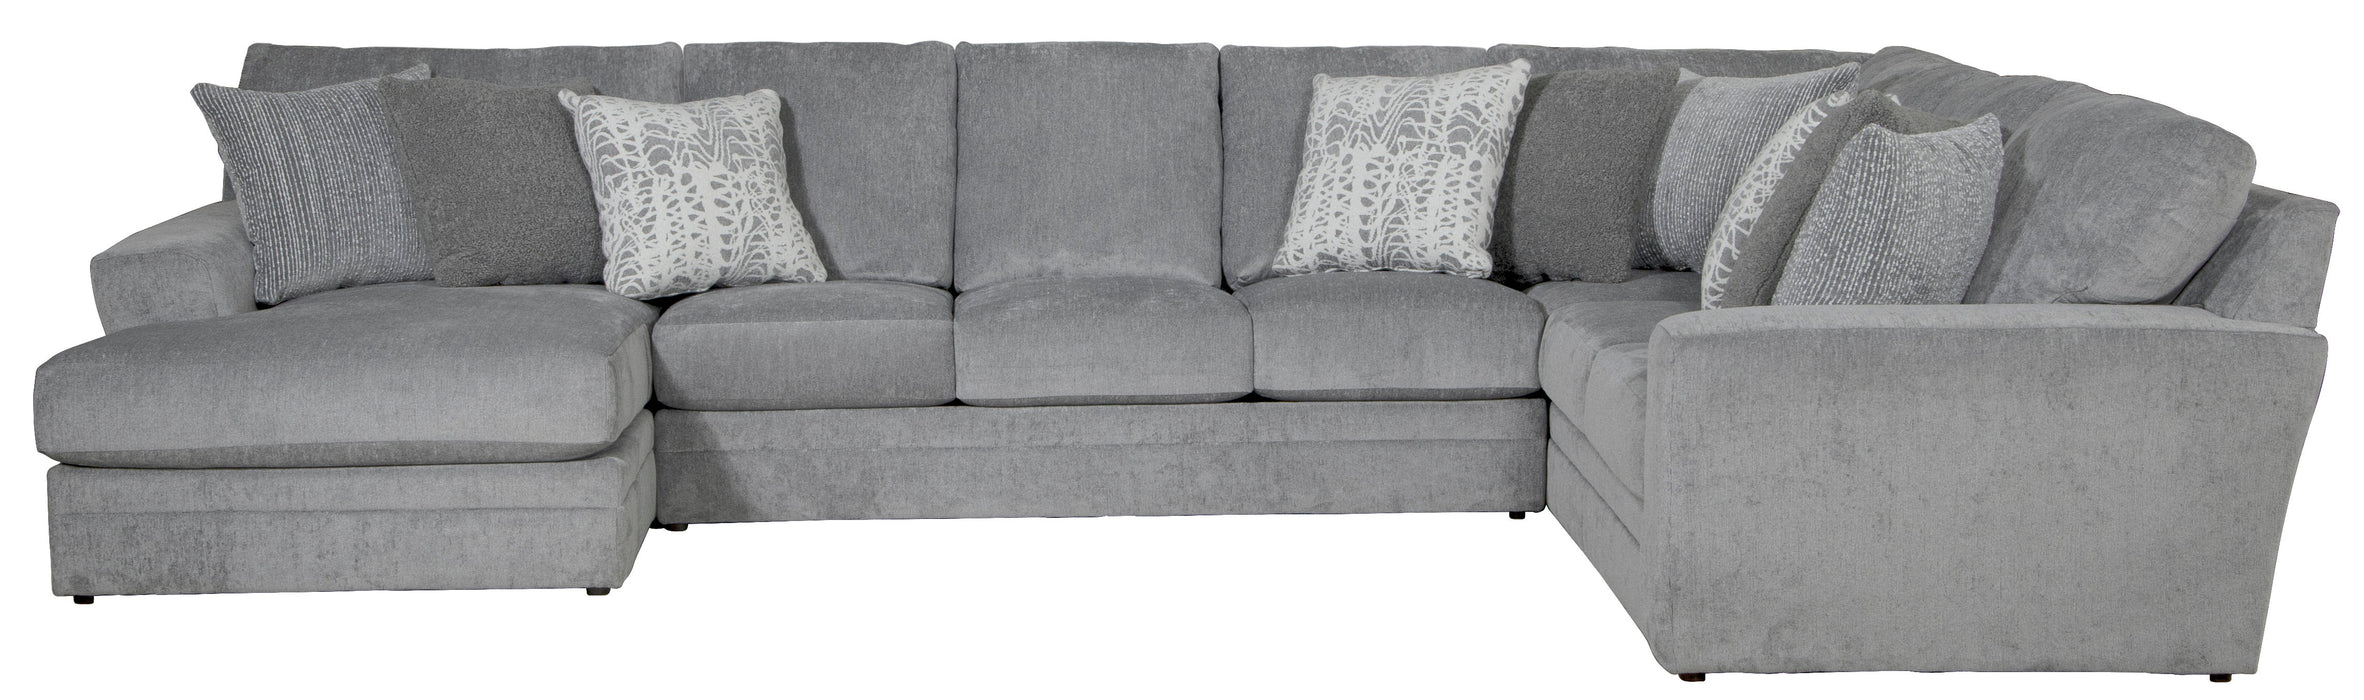 Glacier - 3 Piece Sectional With LSF Chaise, Comfort Coil Seating And 9 Included Accent Pillows